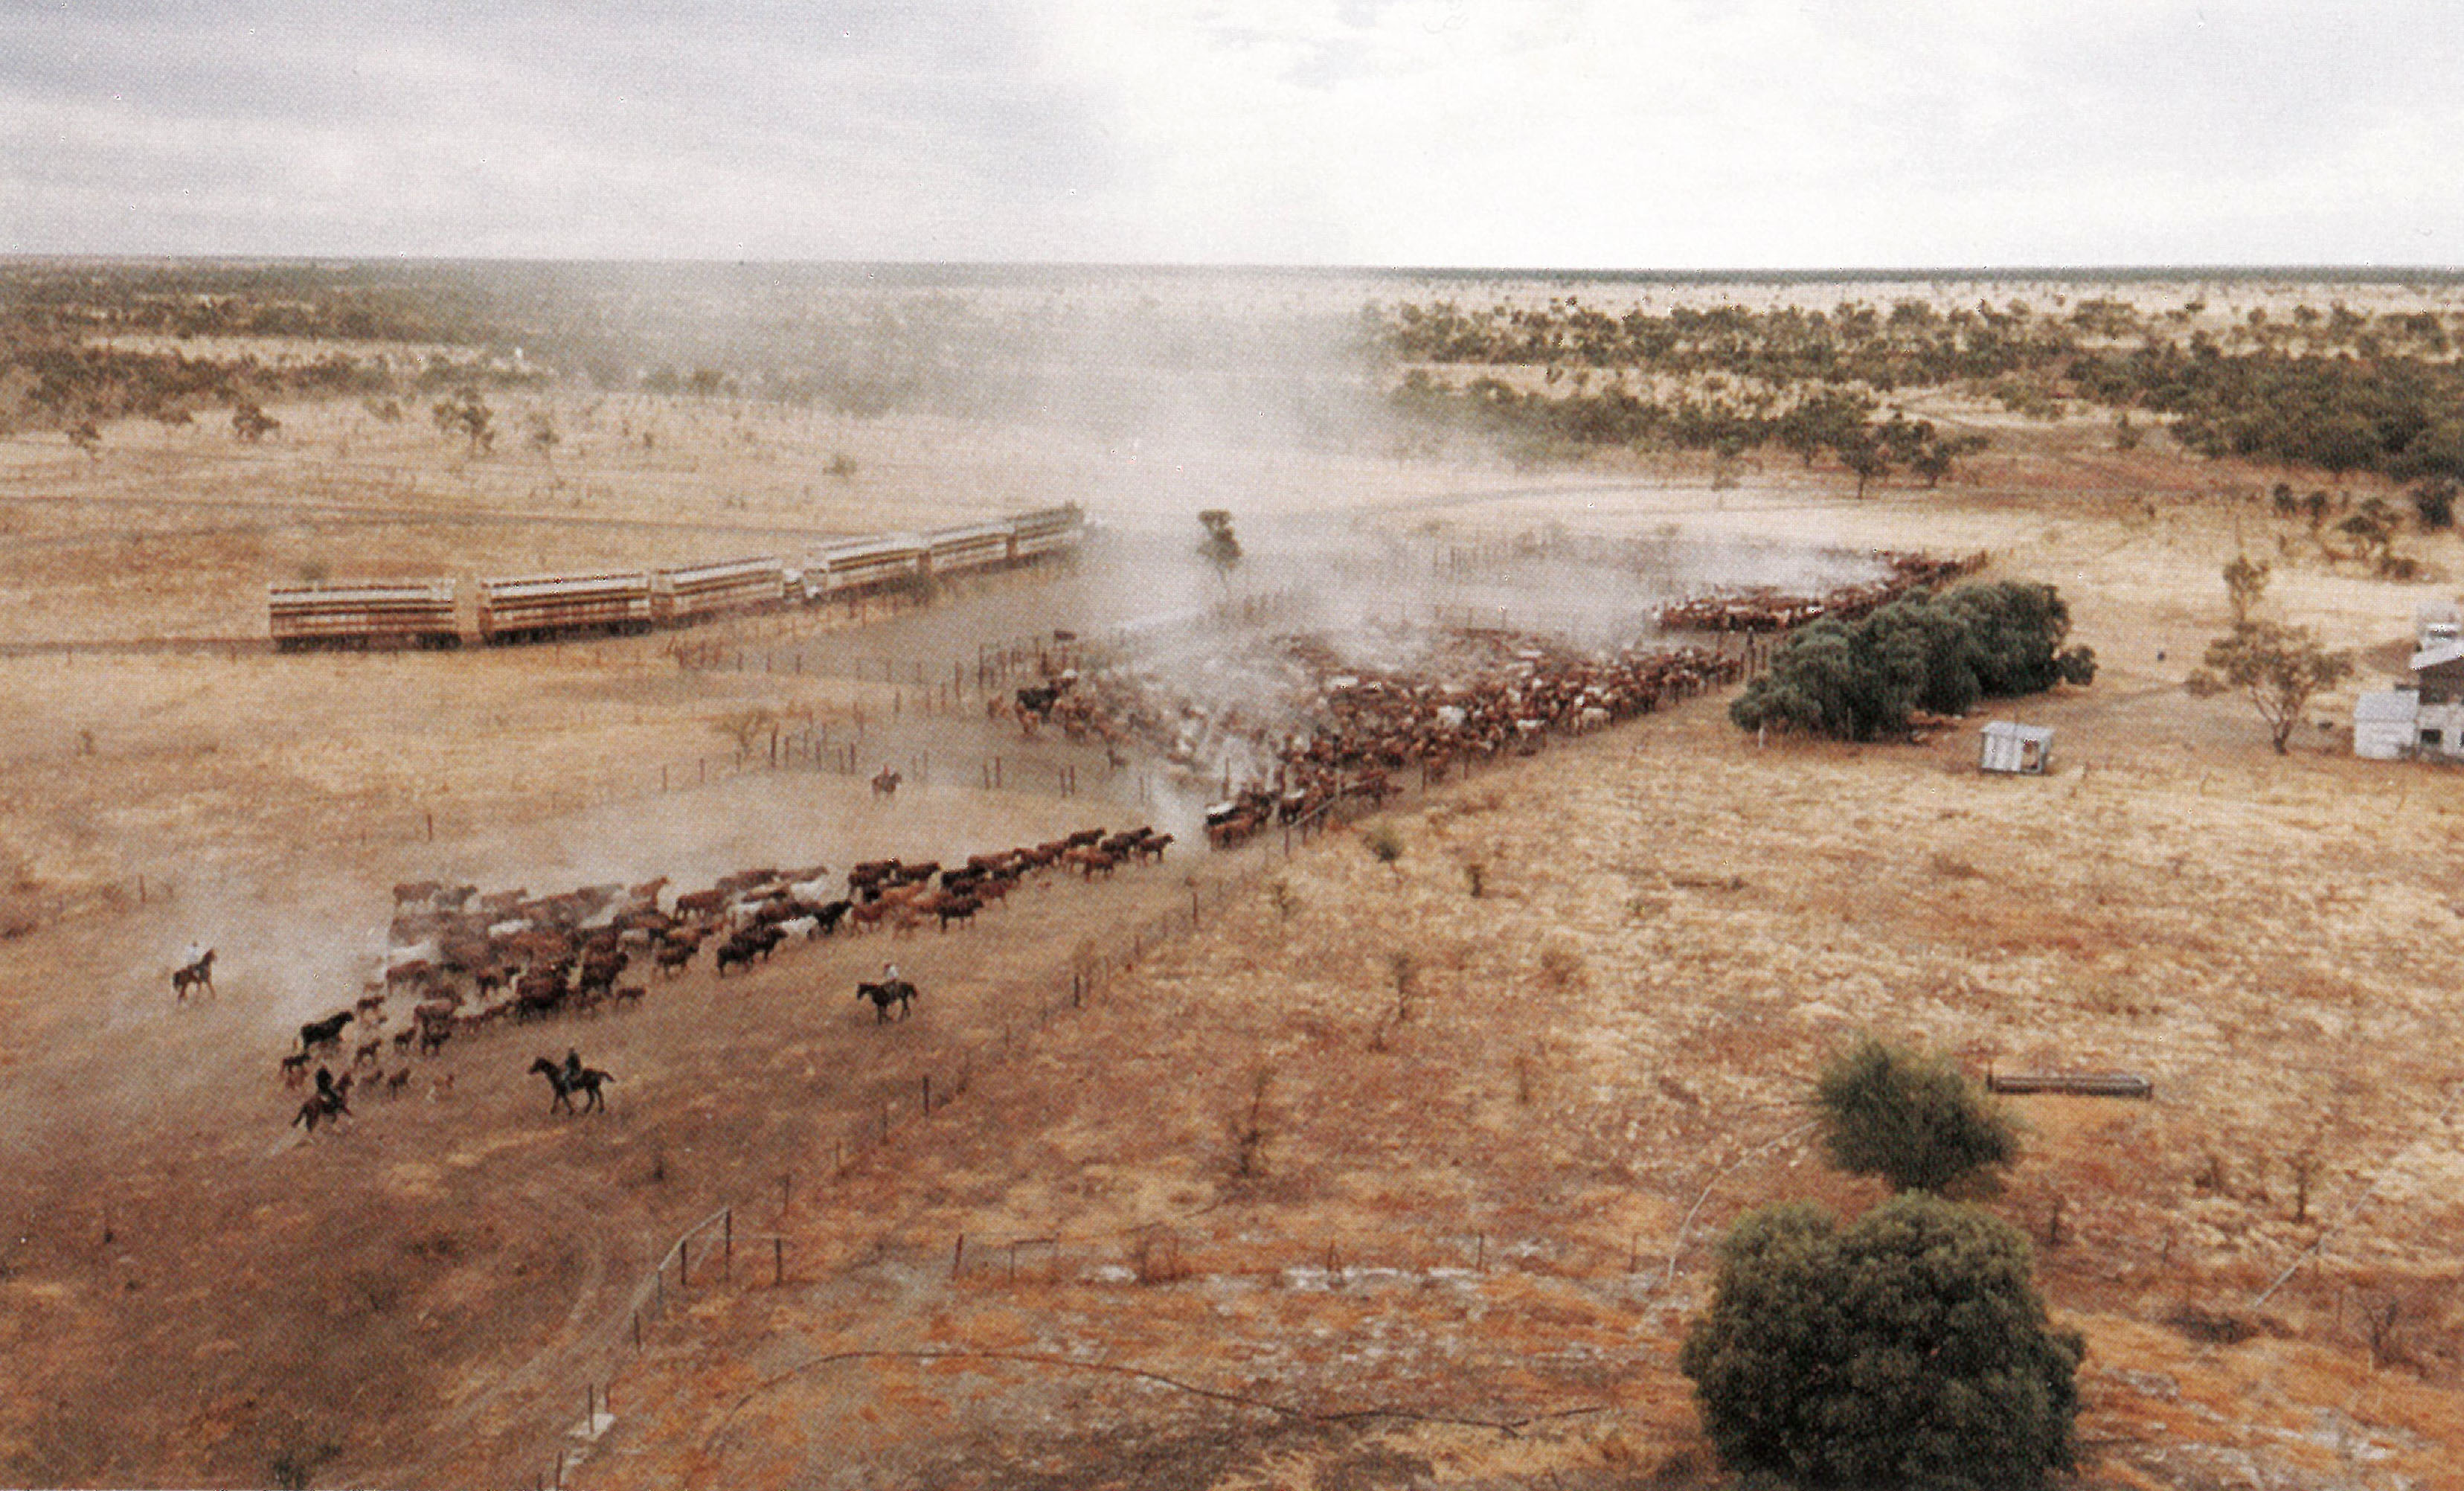 Yarding and trucking cattle at Canobie Station, Queensland, 1992 (From AACo Staff News).